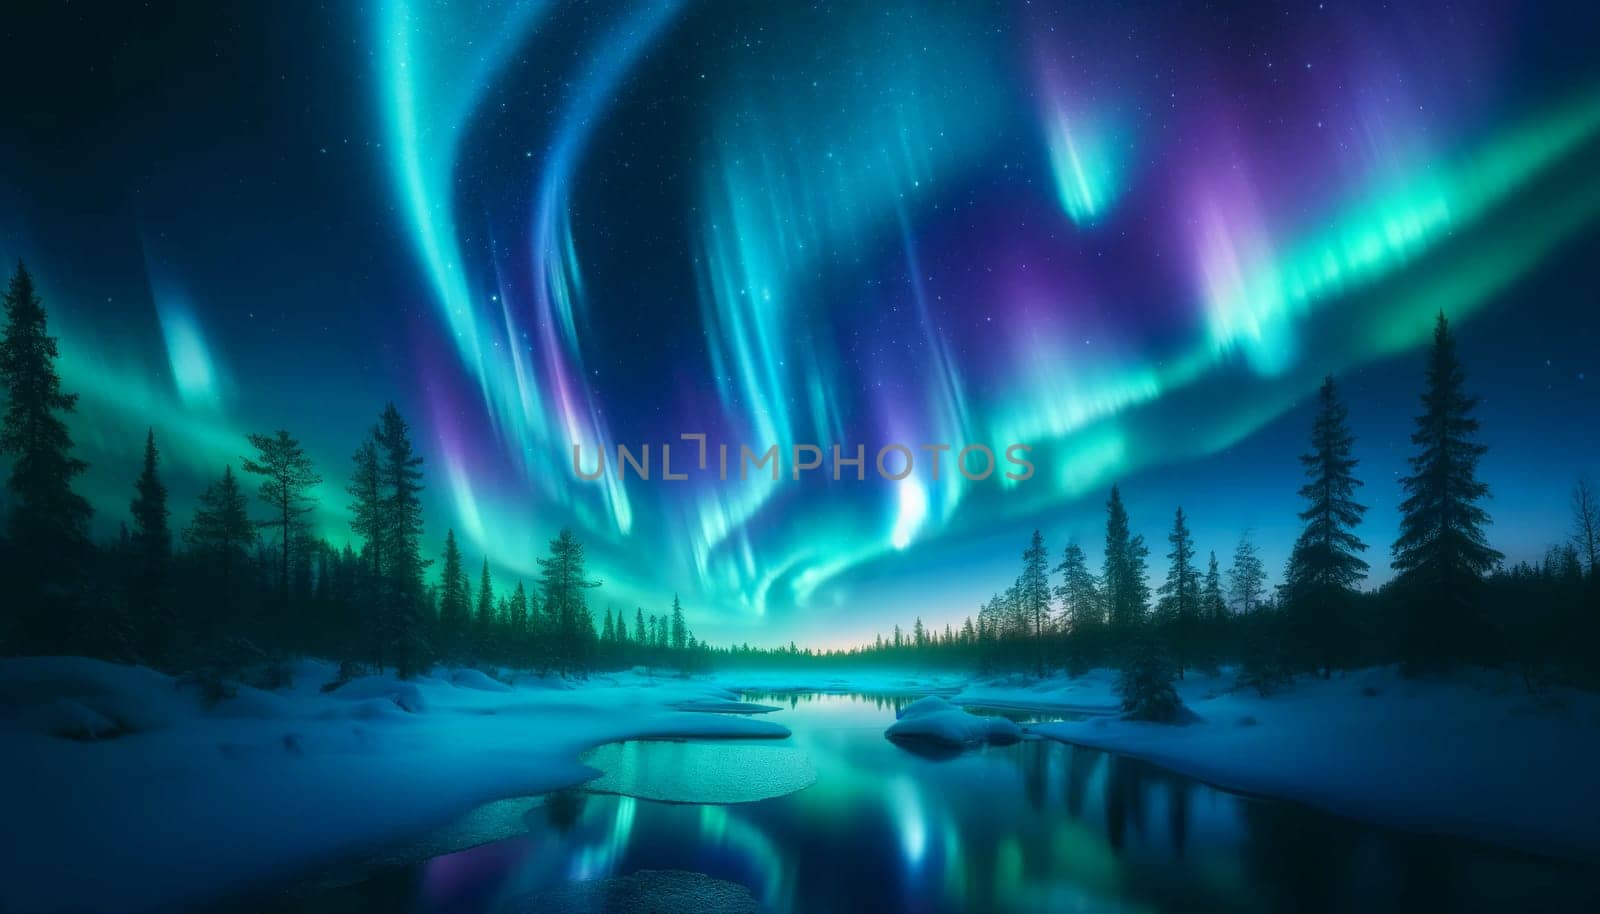 Northern lights in blue tones over a snow-covered river and forest.